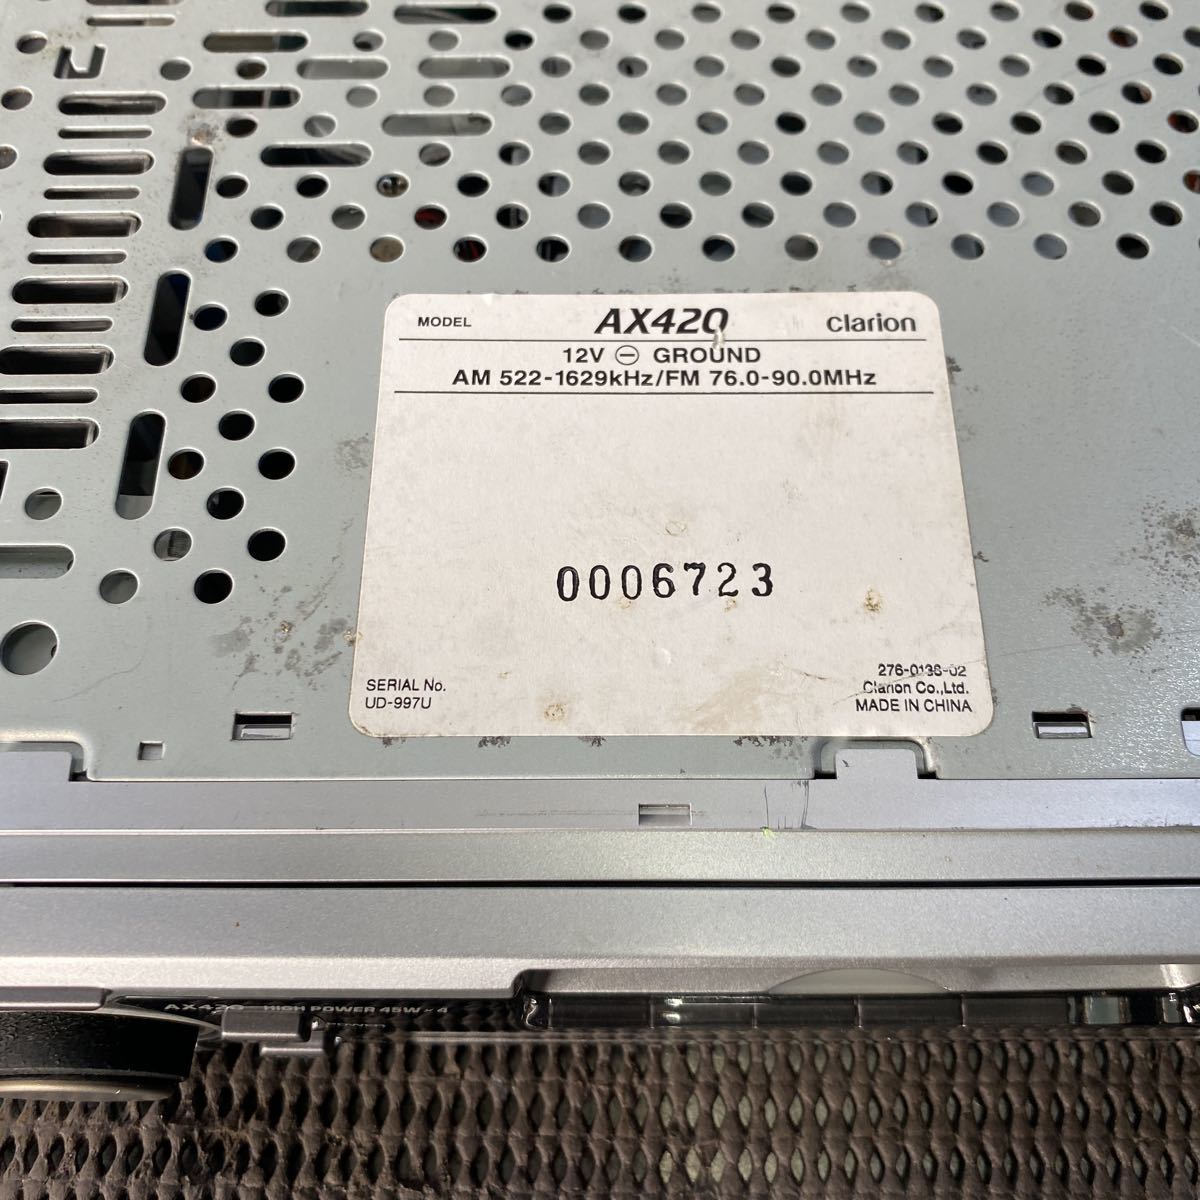 Clarion tape deck AX420 operation not yet verification Junk 